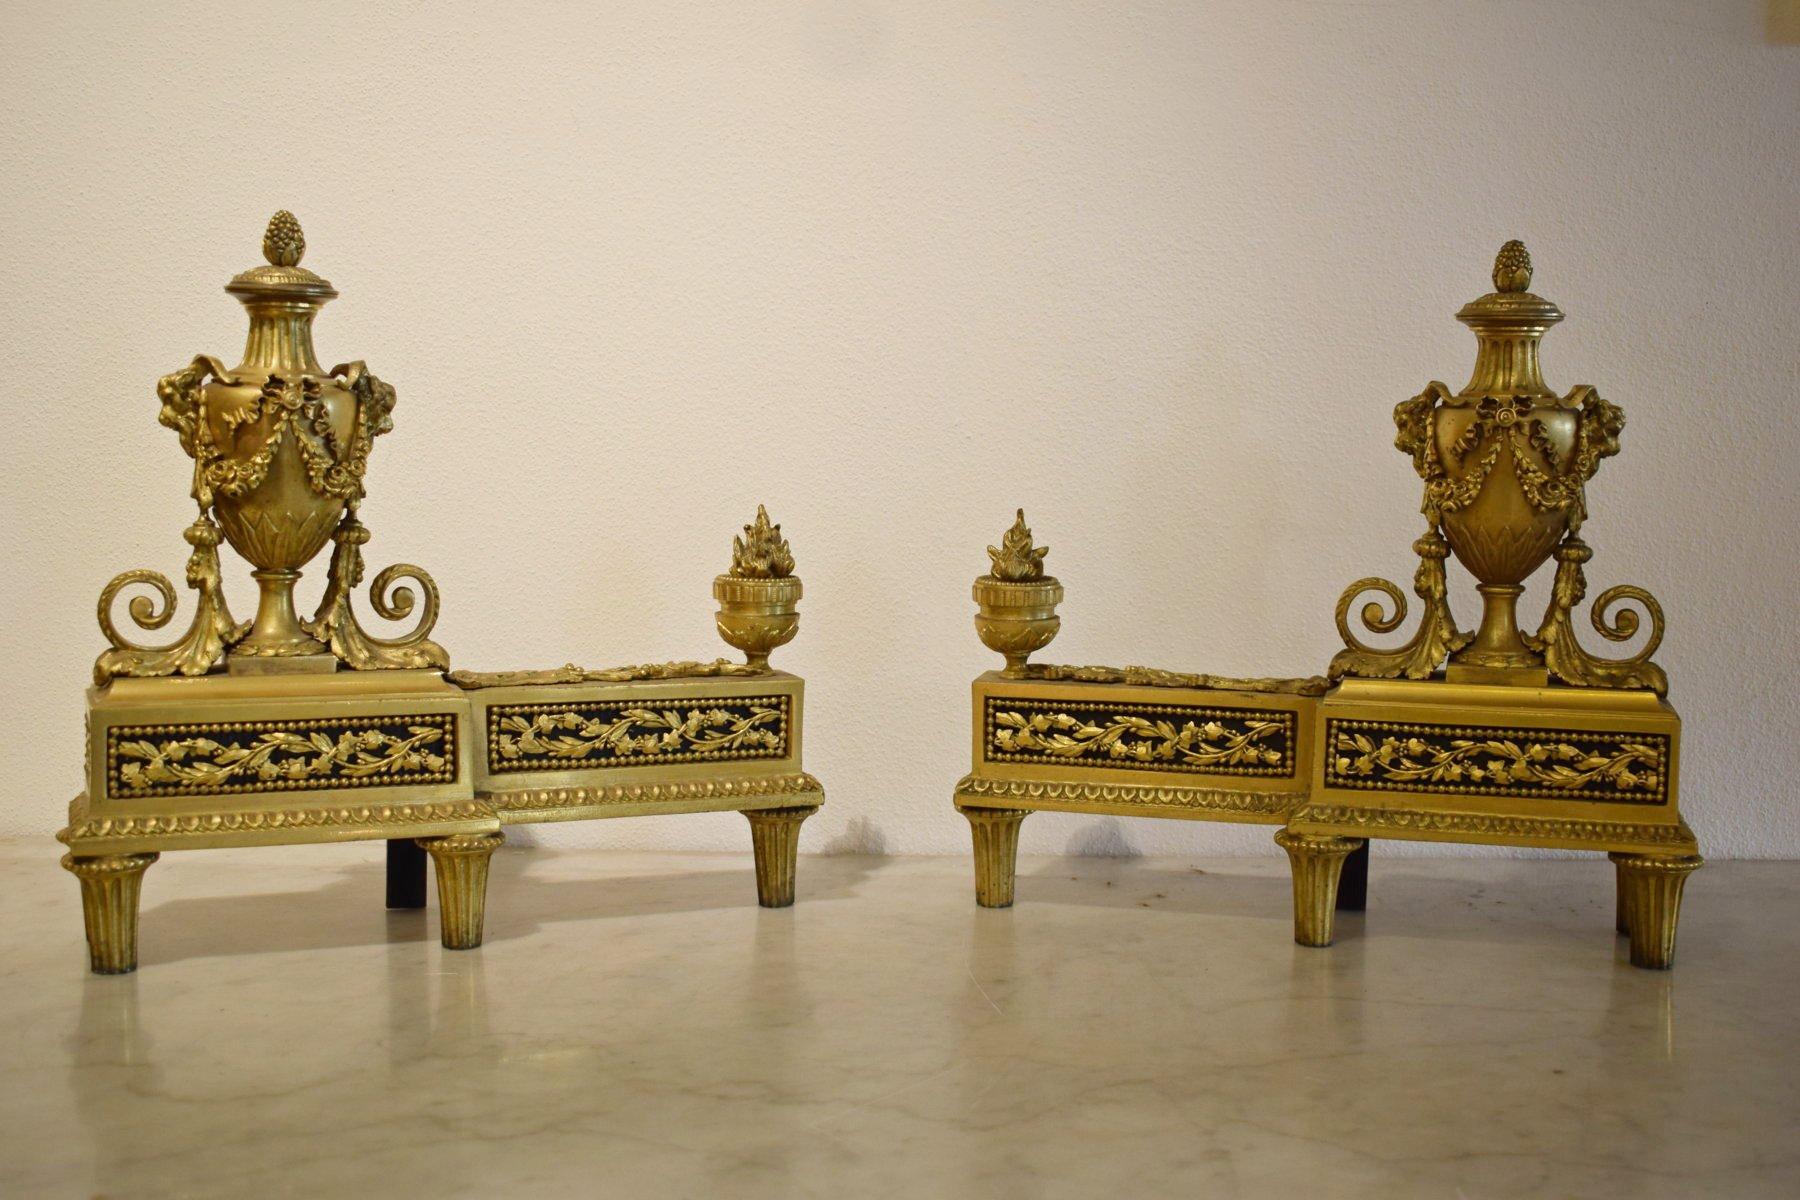 19Th Century, Pair of French Louis XVI style gilt bronze Fireplace Chenets, 

The pair of Fireplace Chenets was made in the Louis XVI style in the fist half of the 19th century. The Fireplace Chenets are in gilded bronze and finely chiselled.